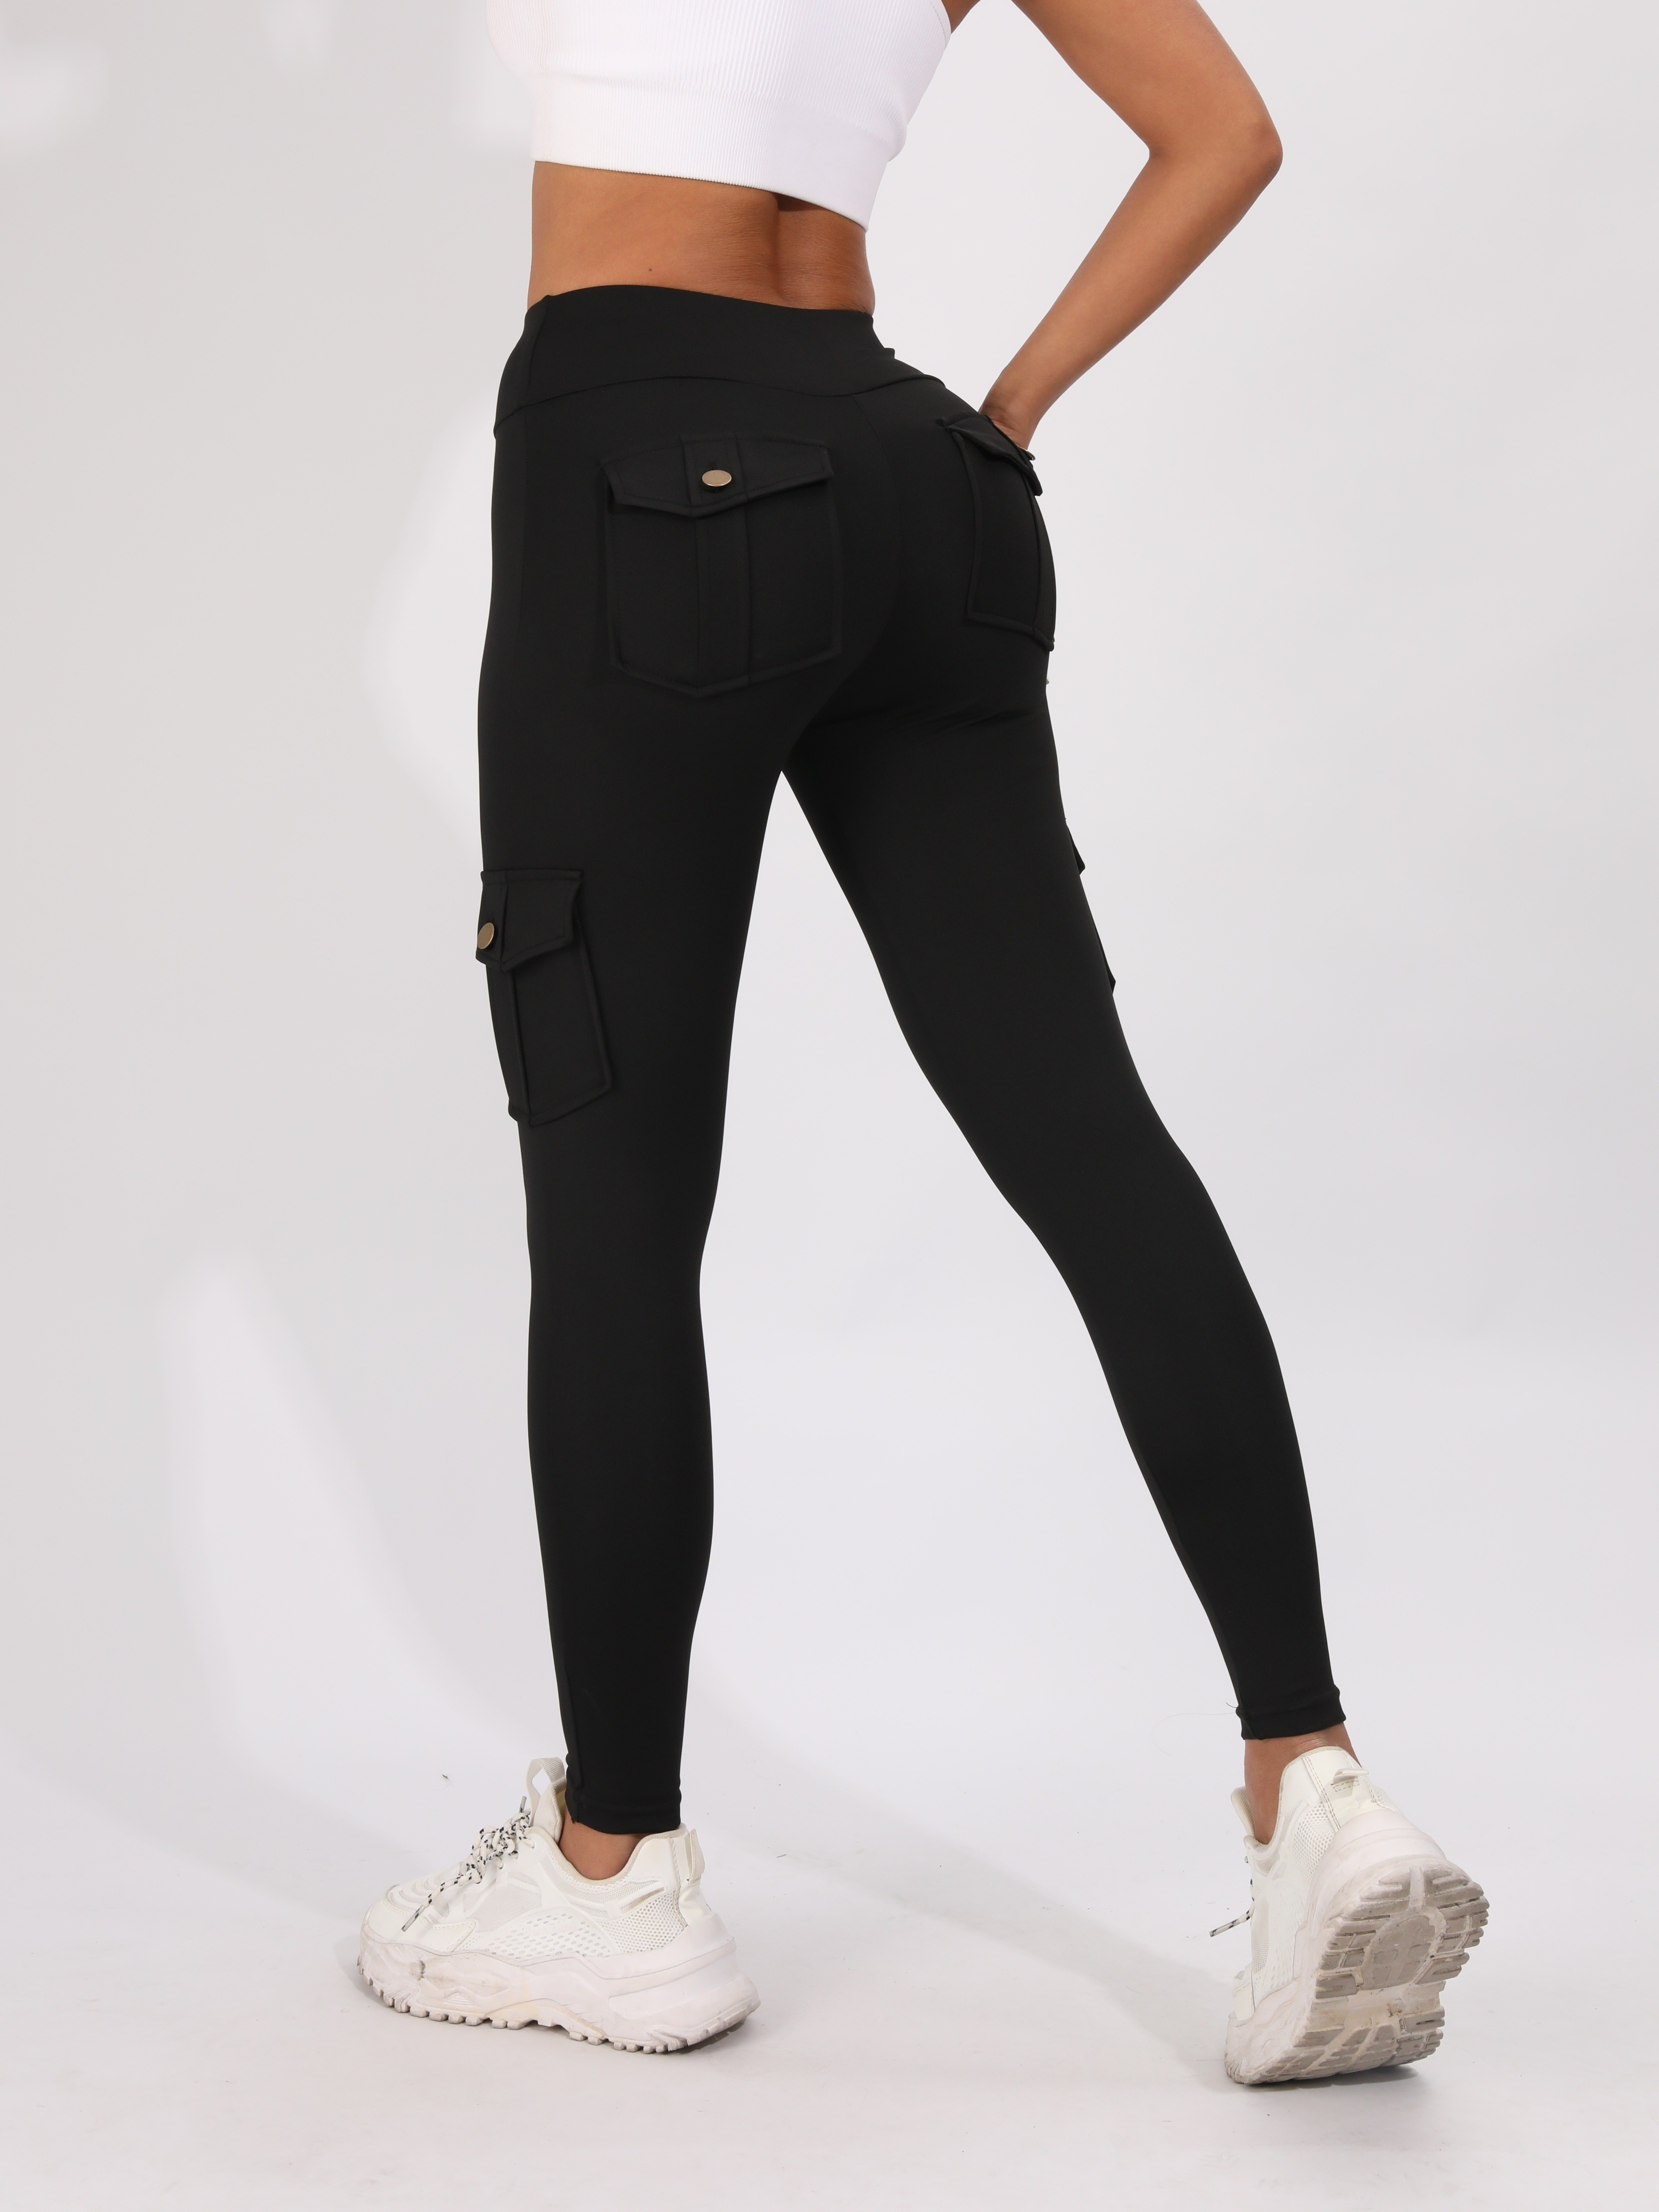 Black and Friday Deals 2023 Taqqpue Womens Workout Leggings Yoga Pants  Quick Dry Solid Color Sweatpants Cargo Pants Stretch Workout Pants Yoga  Leggings 